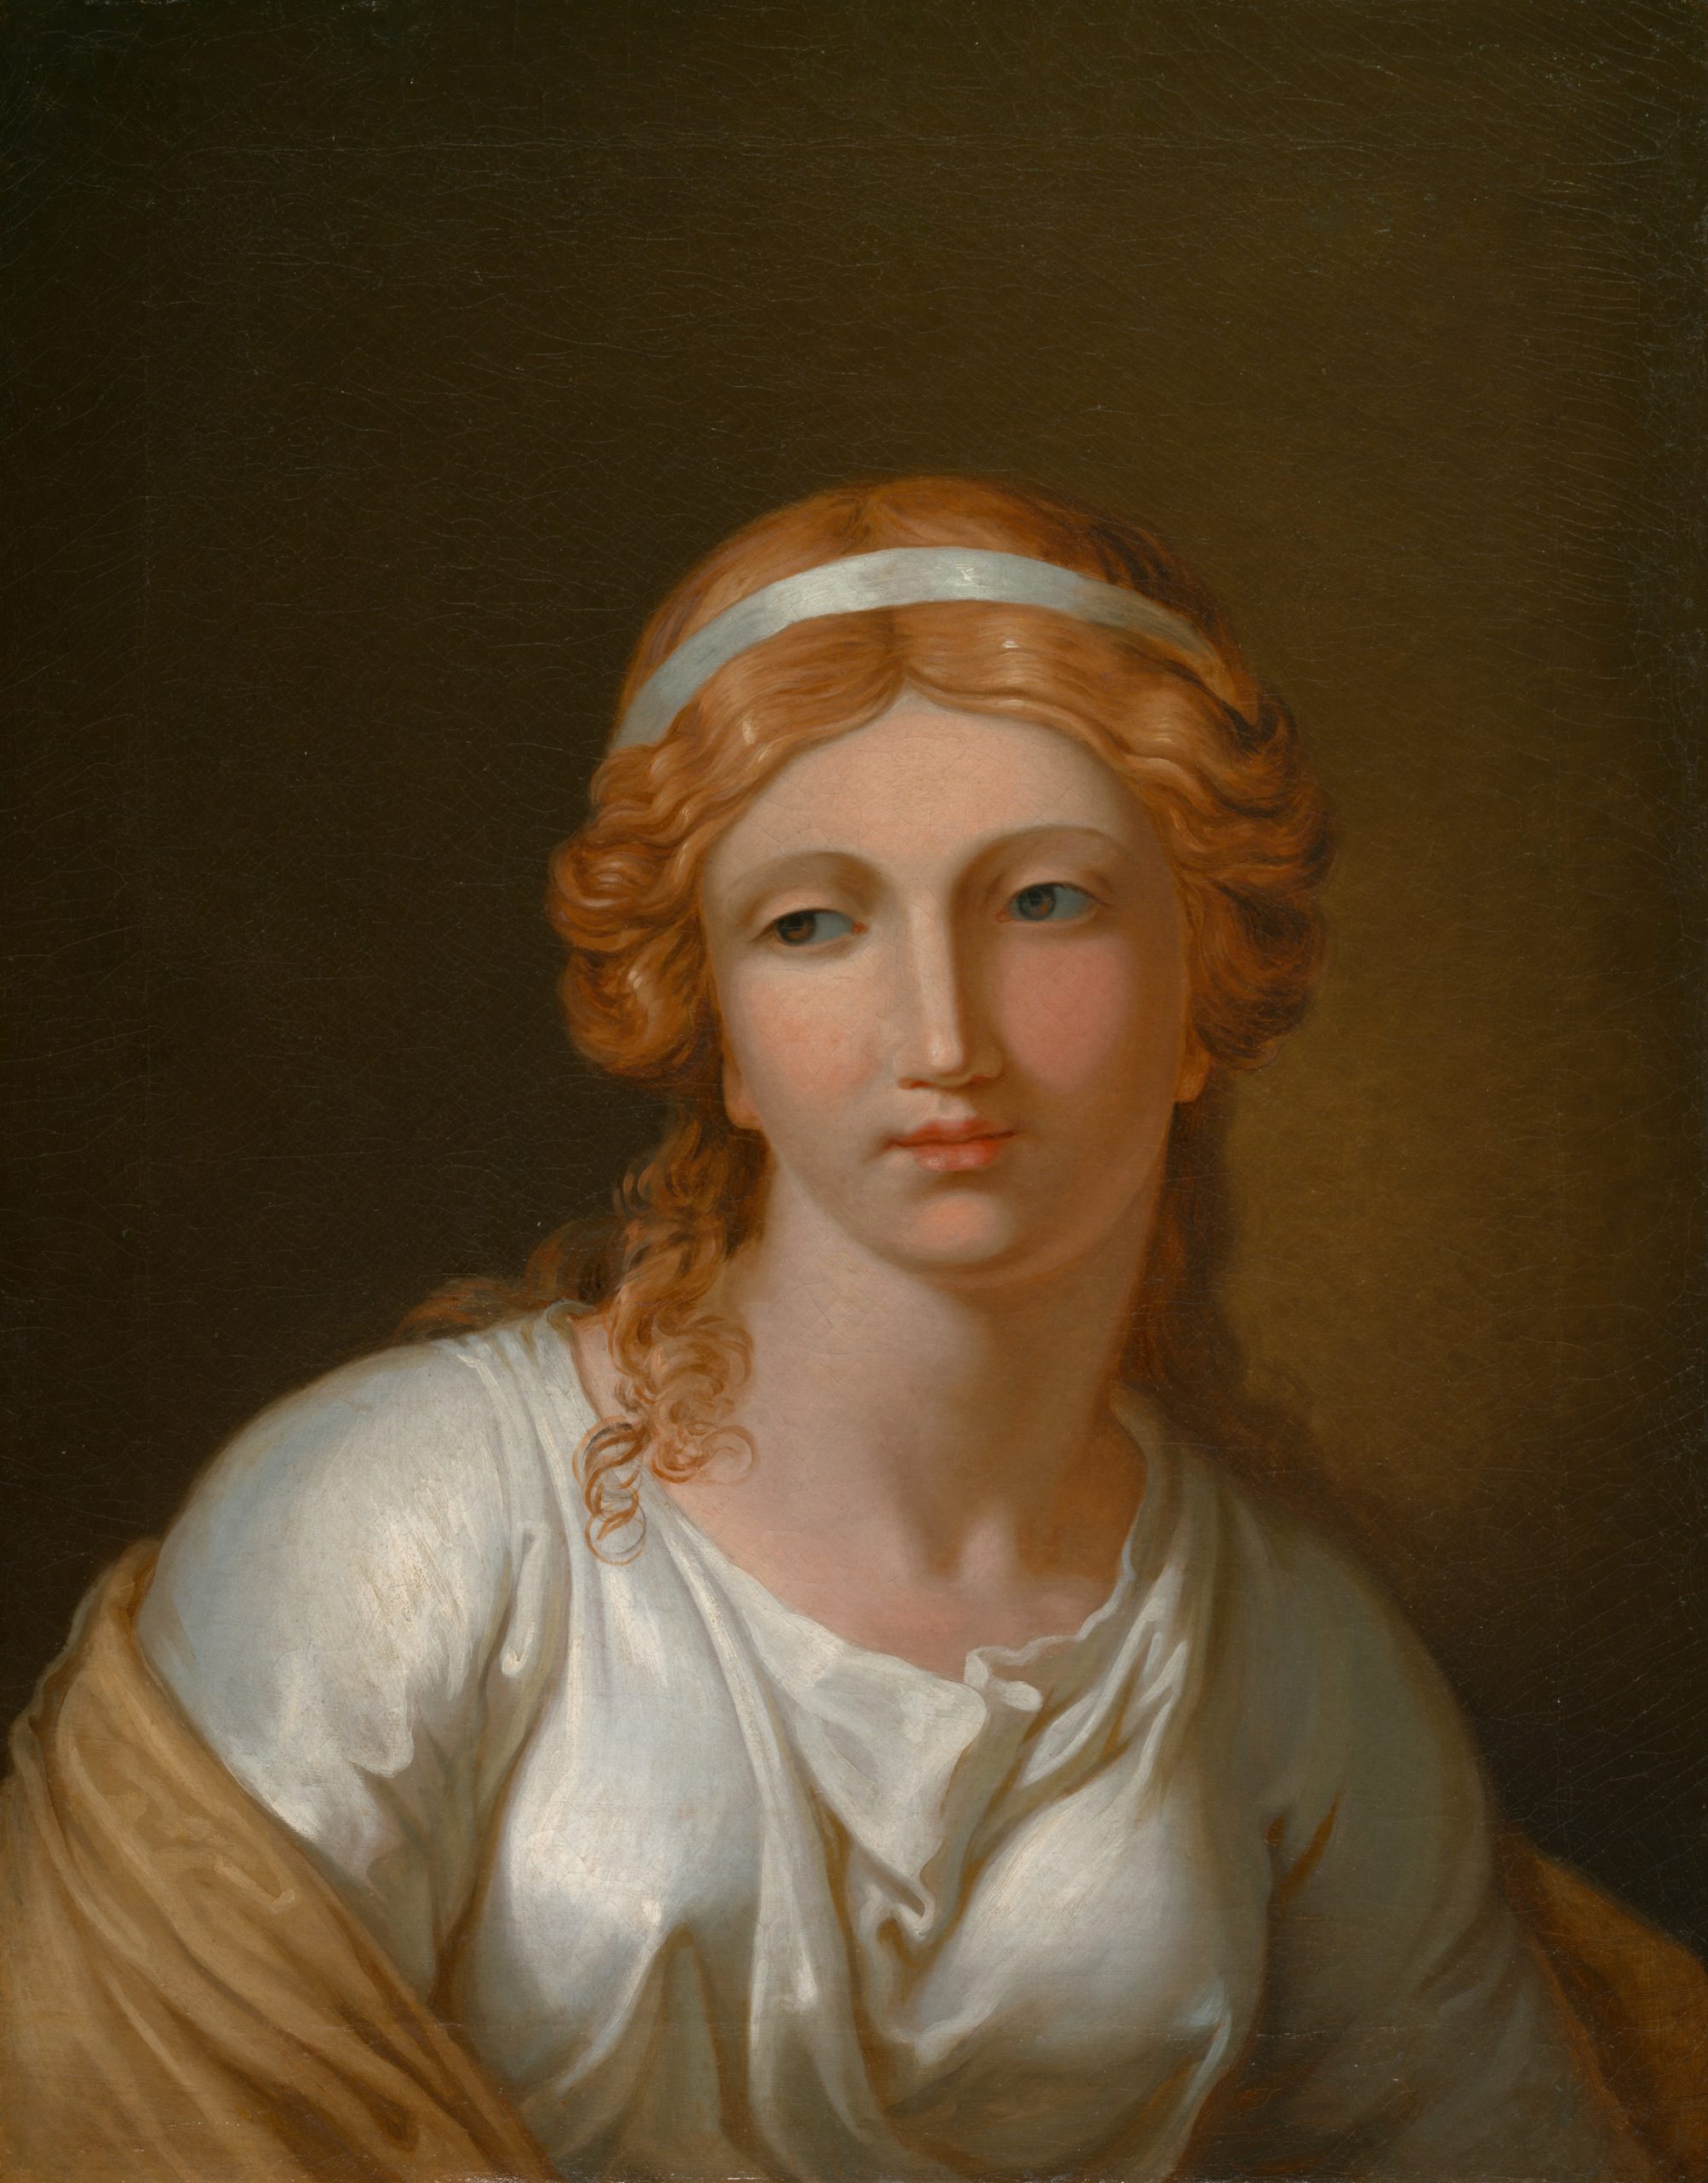 A portrait of a woman staring off with a gaunt expression. The colours are muted.